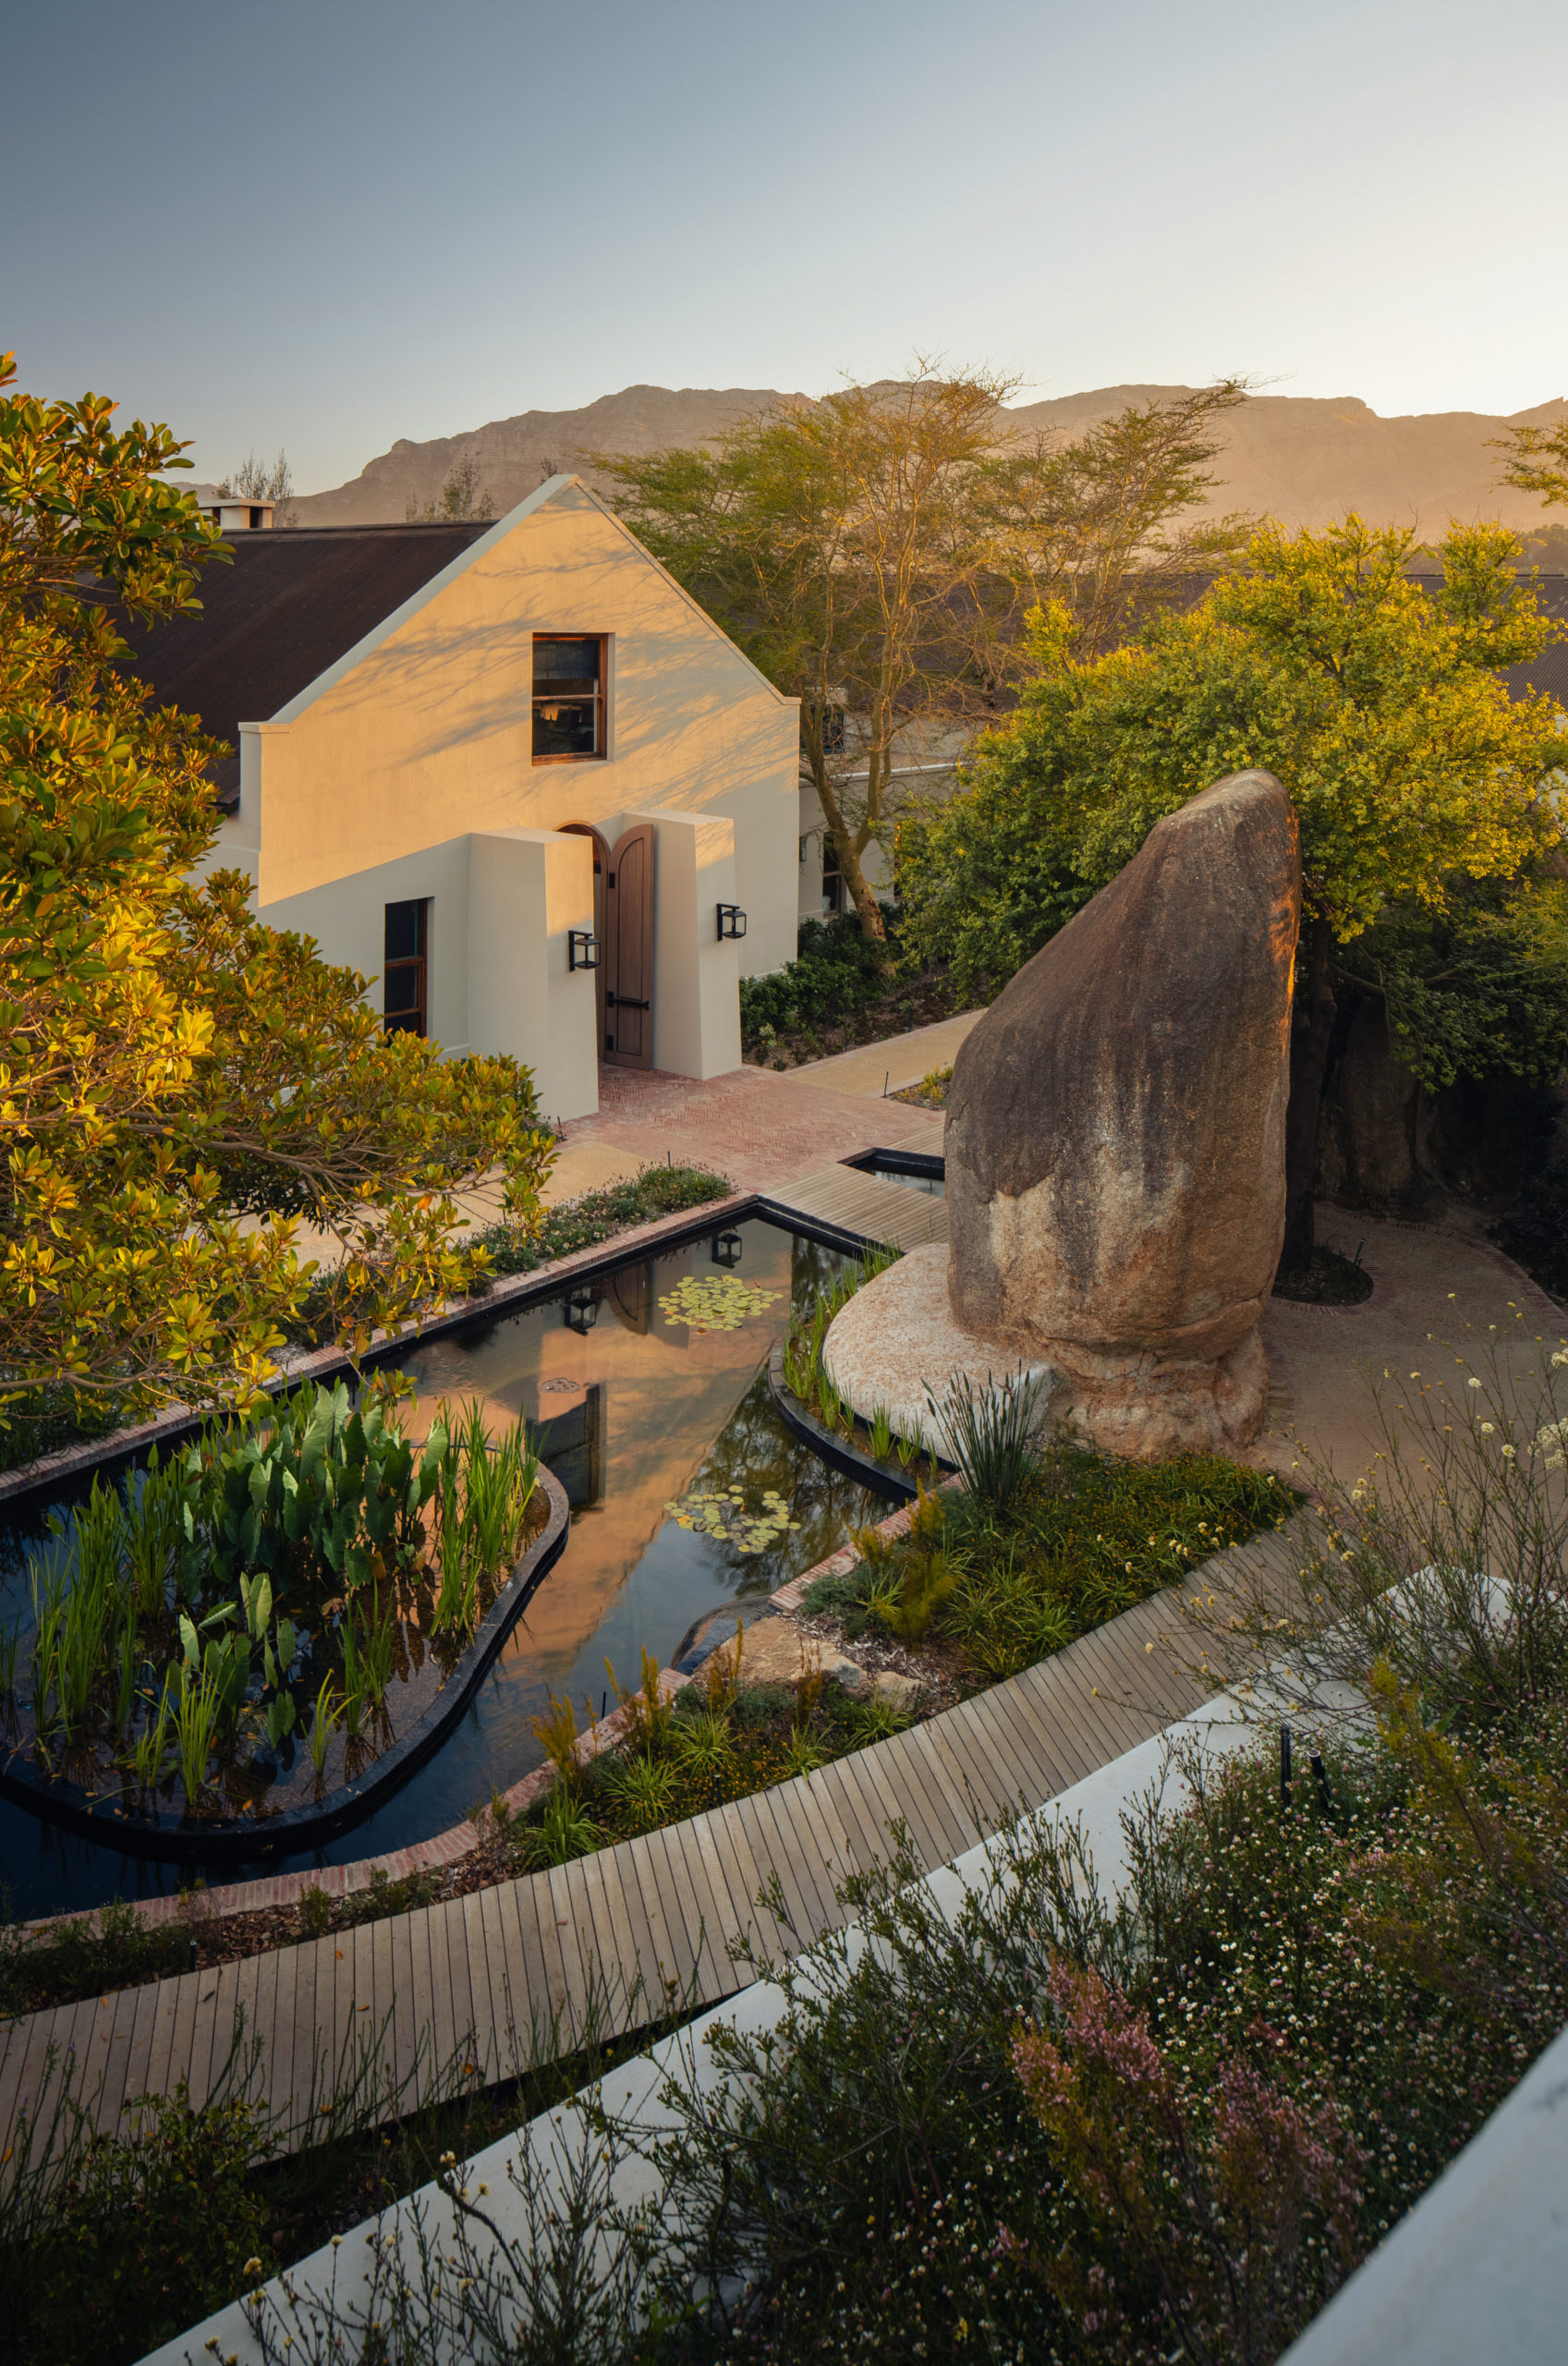 Ernie Els Winery an Architectural and Landscape wonder in the Cape Winelands